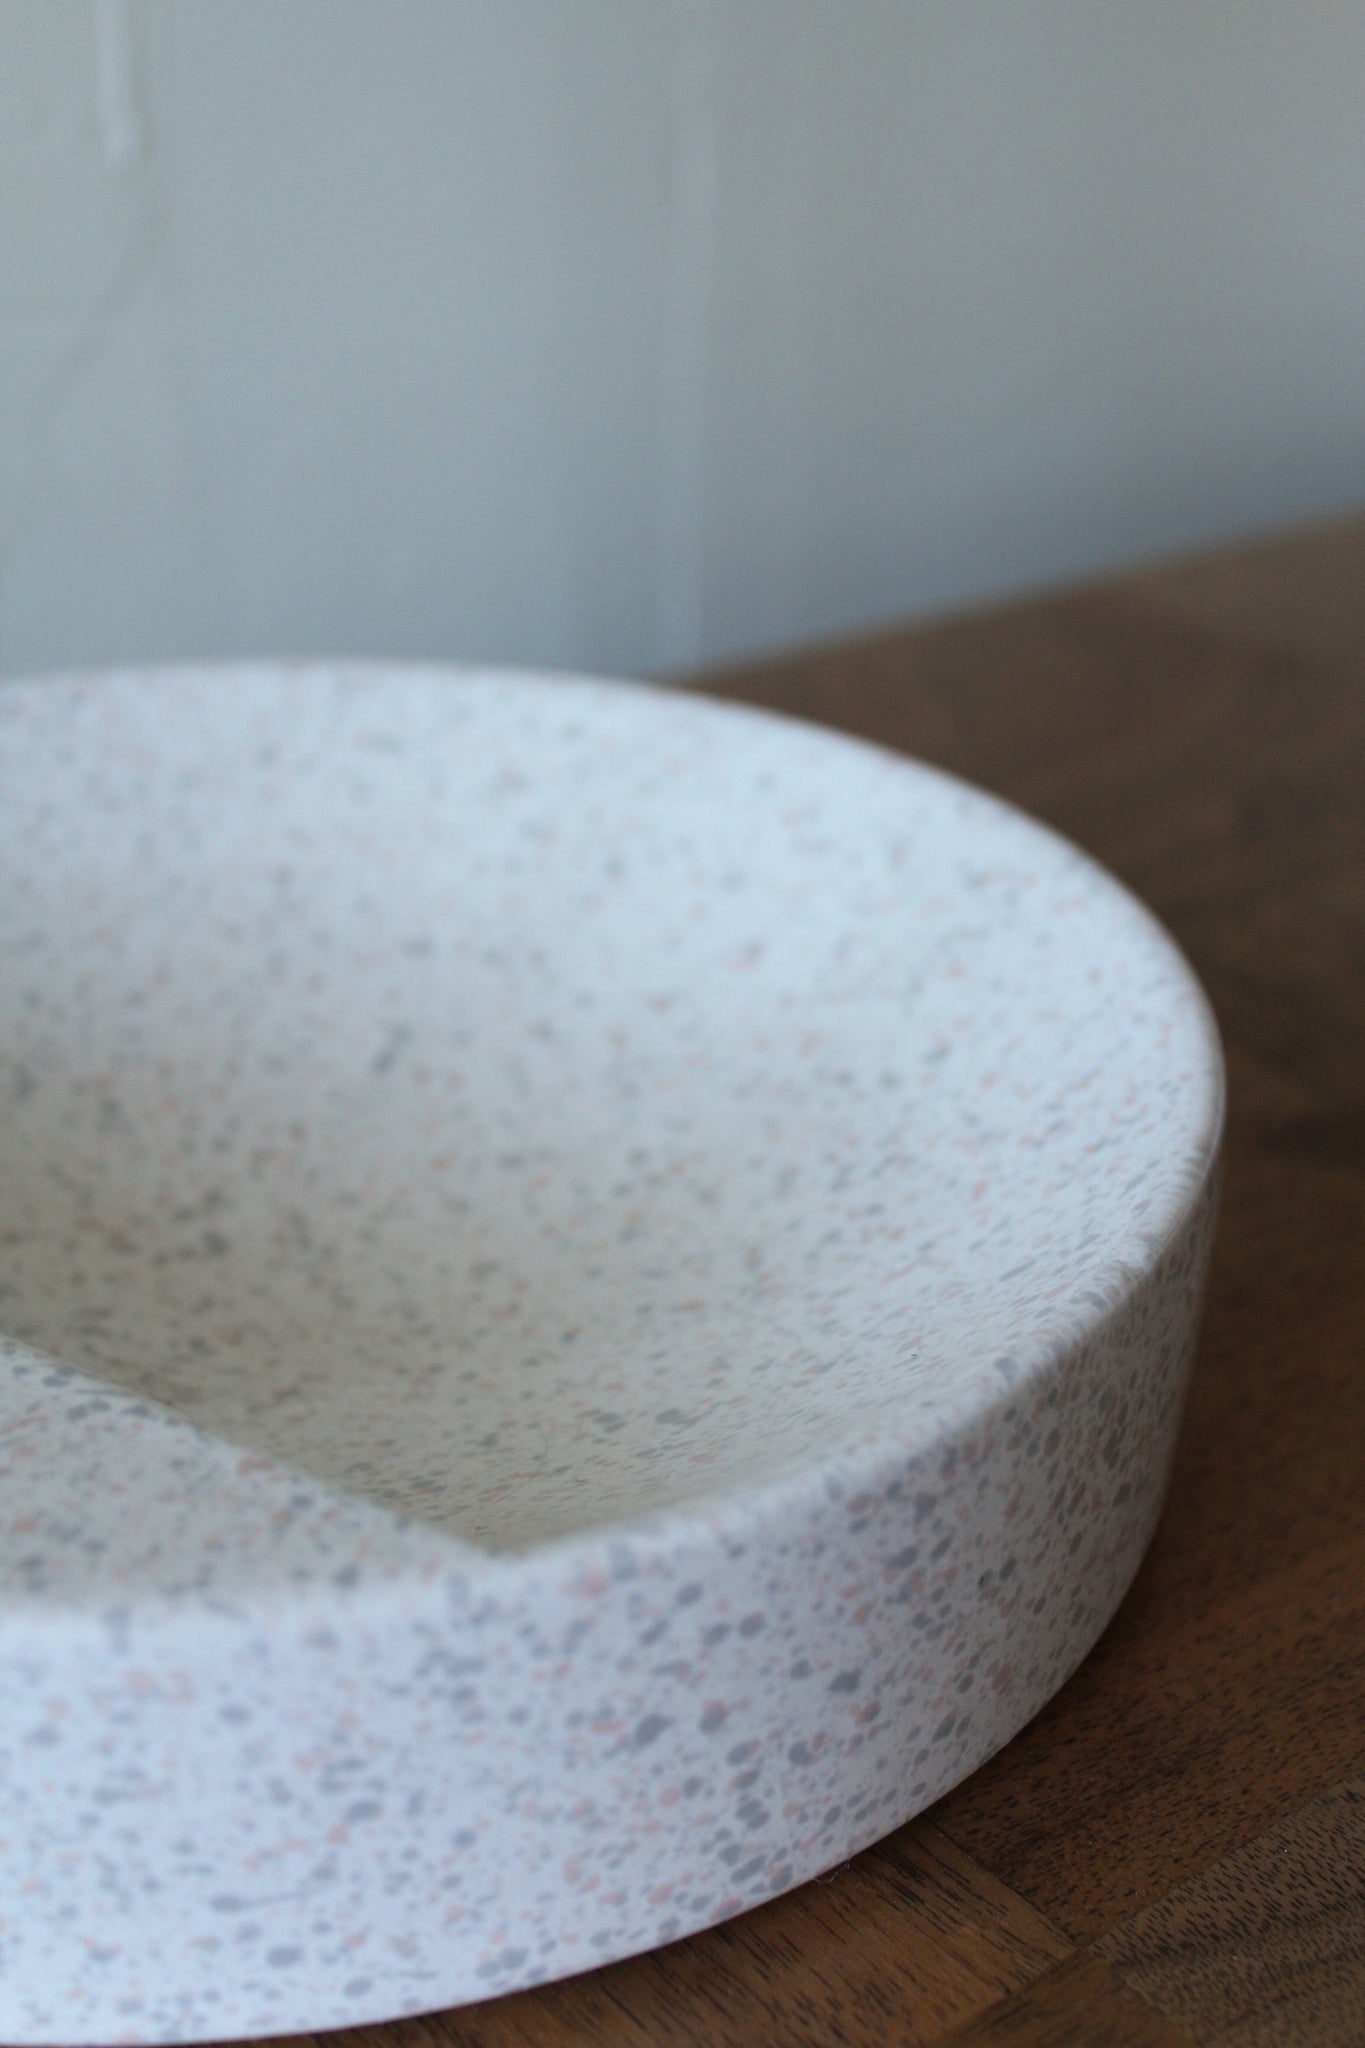 Speckled Ashtray